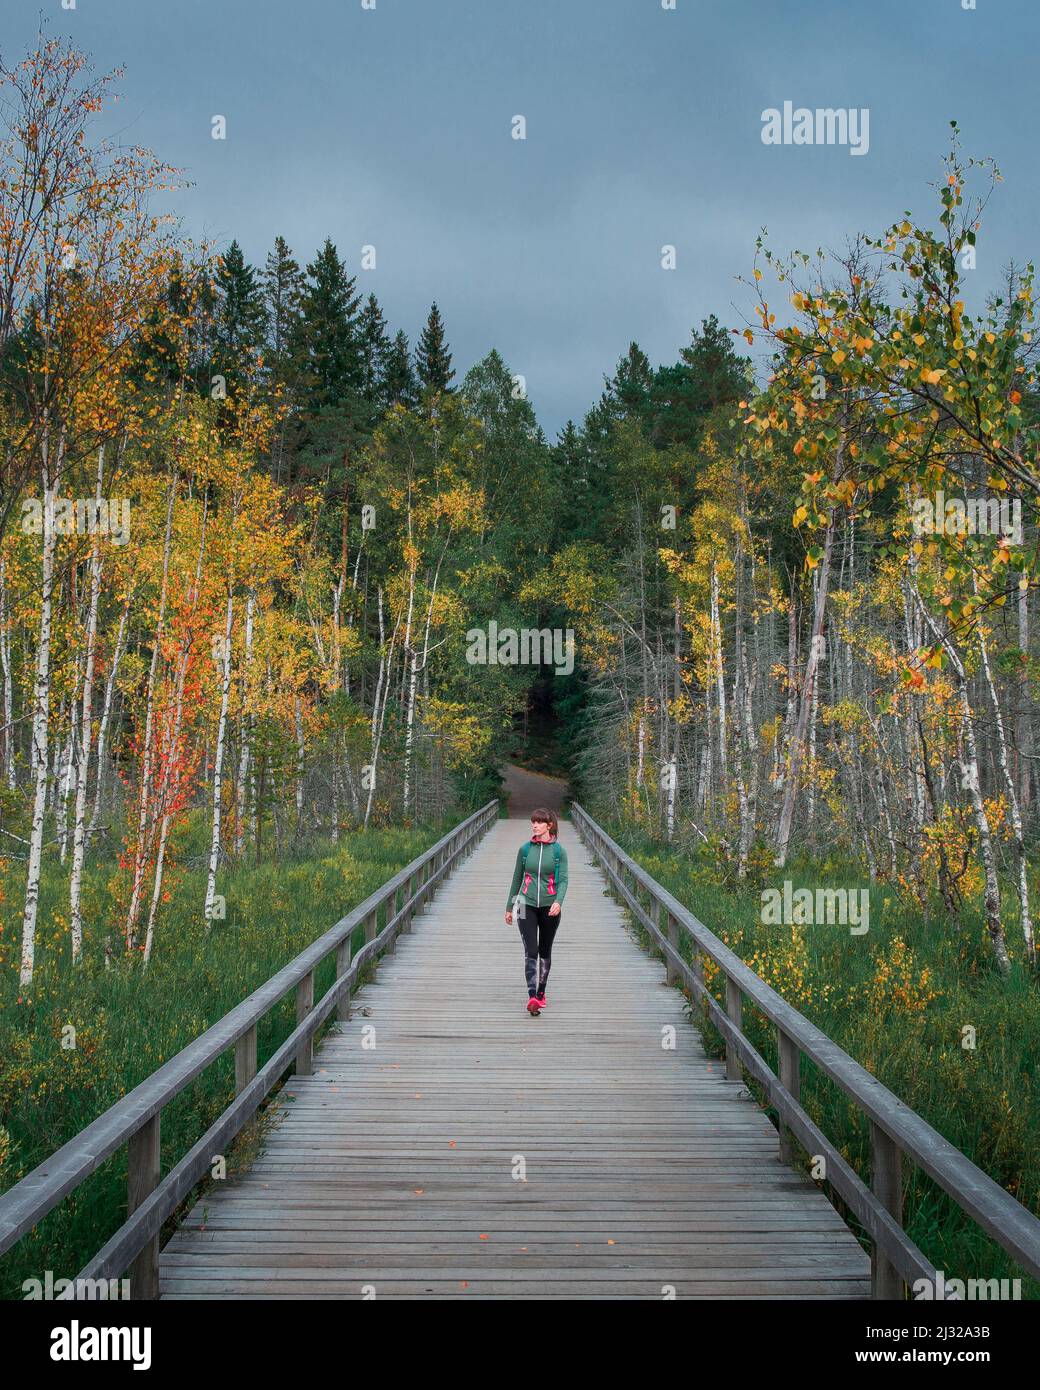 Woman walks on boardwalk with birch trees with autumn leaves in Tyresta National Park in Sweden Stock Photo